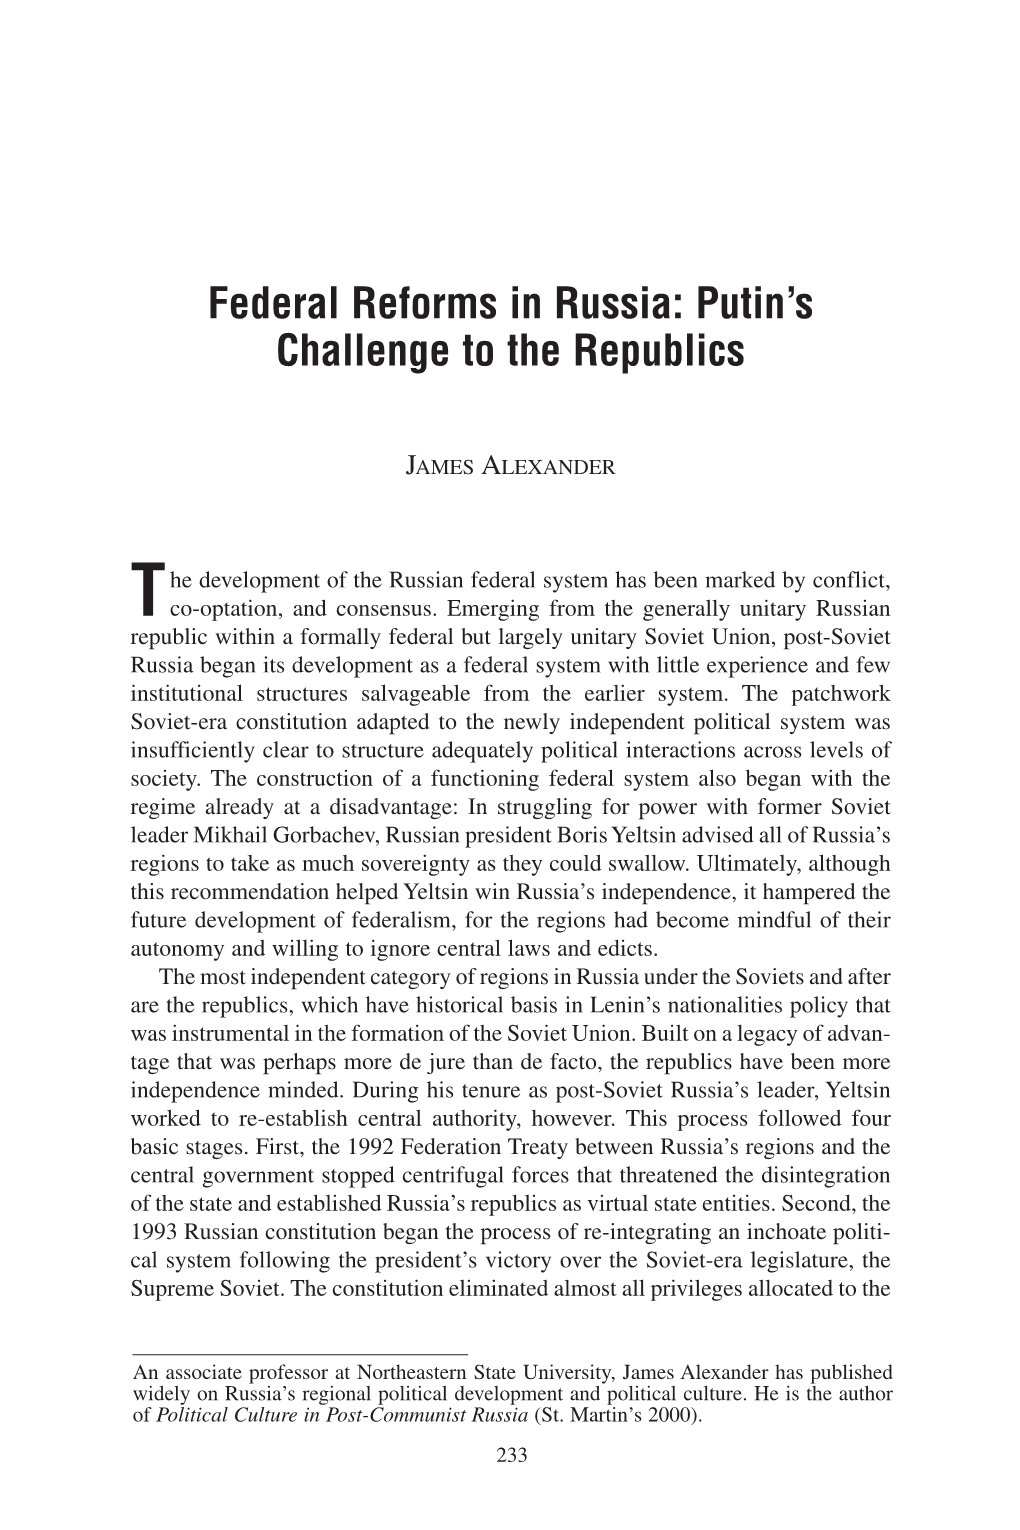 Federal Reforms in Russia: Putin's Challenge to the Republics